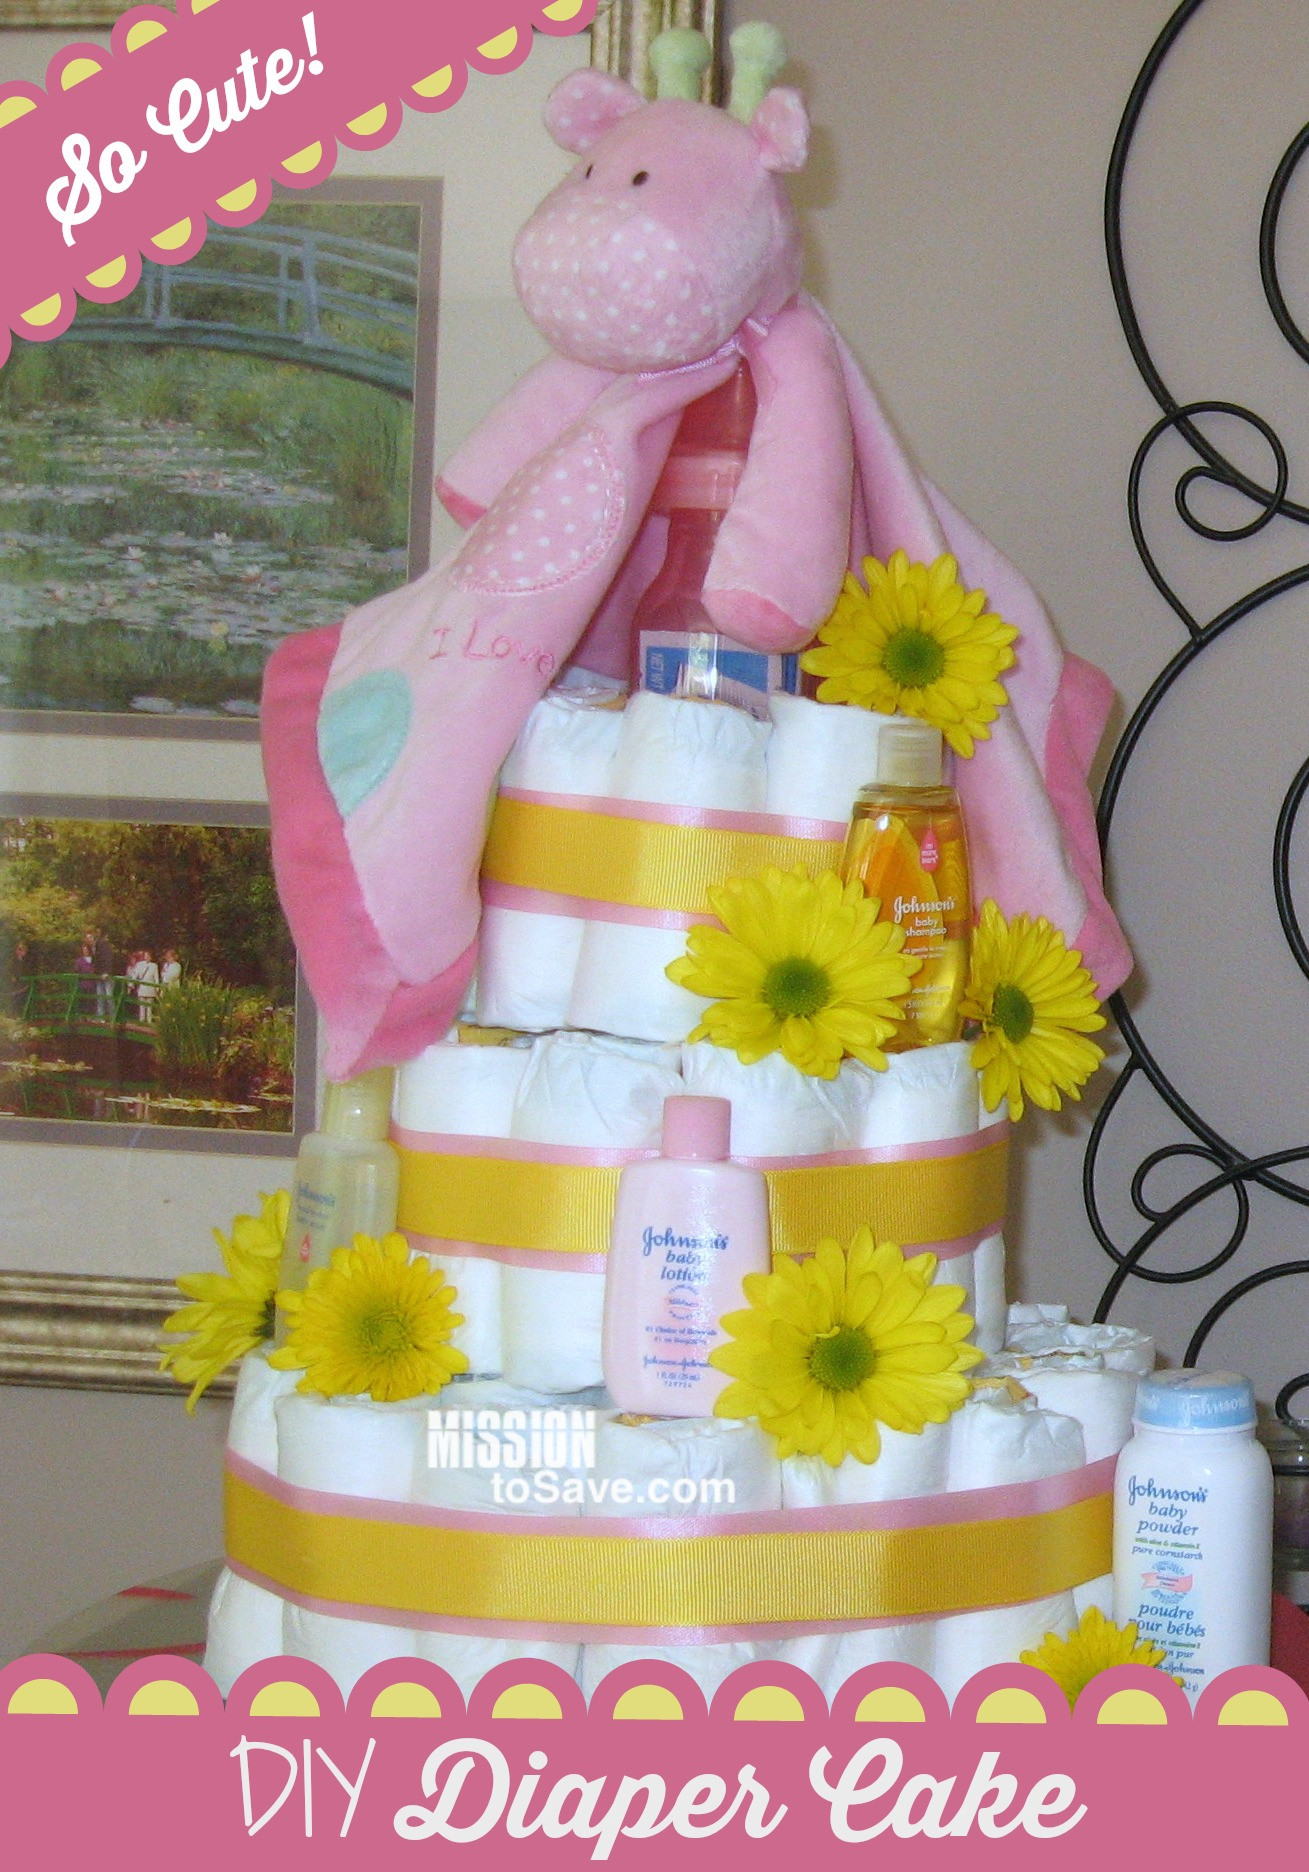 Diy Baby Shower Diaper Cake
 Adorable Diaper Cake for DIY Baby Shower Gift Mission